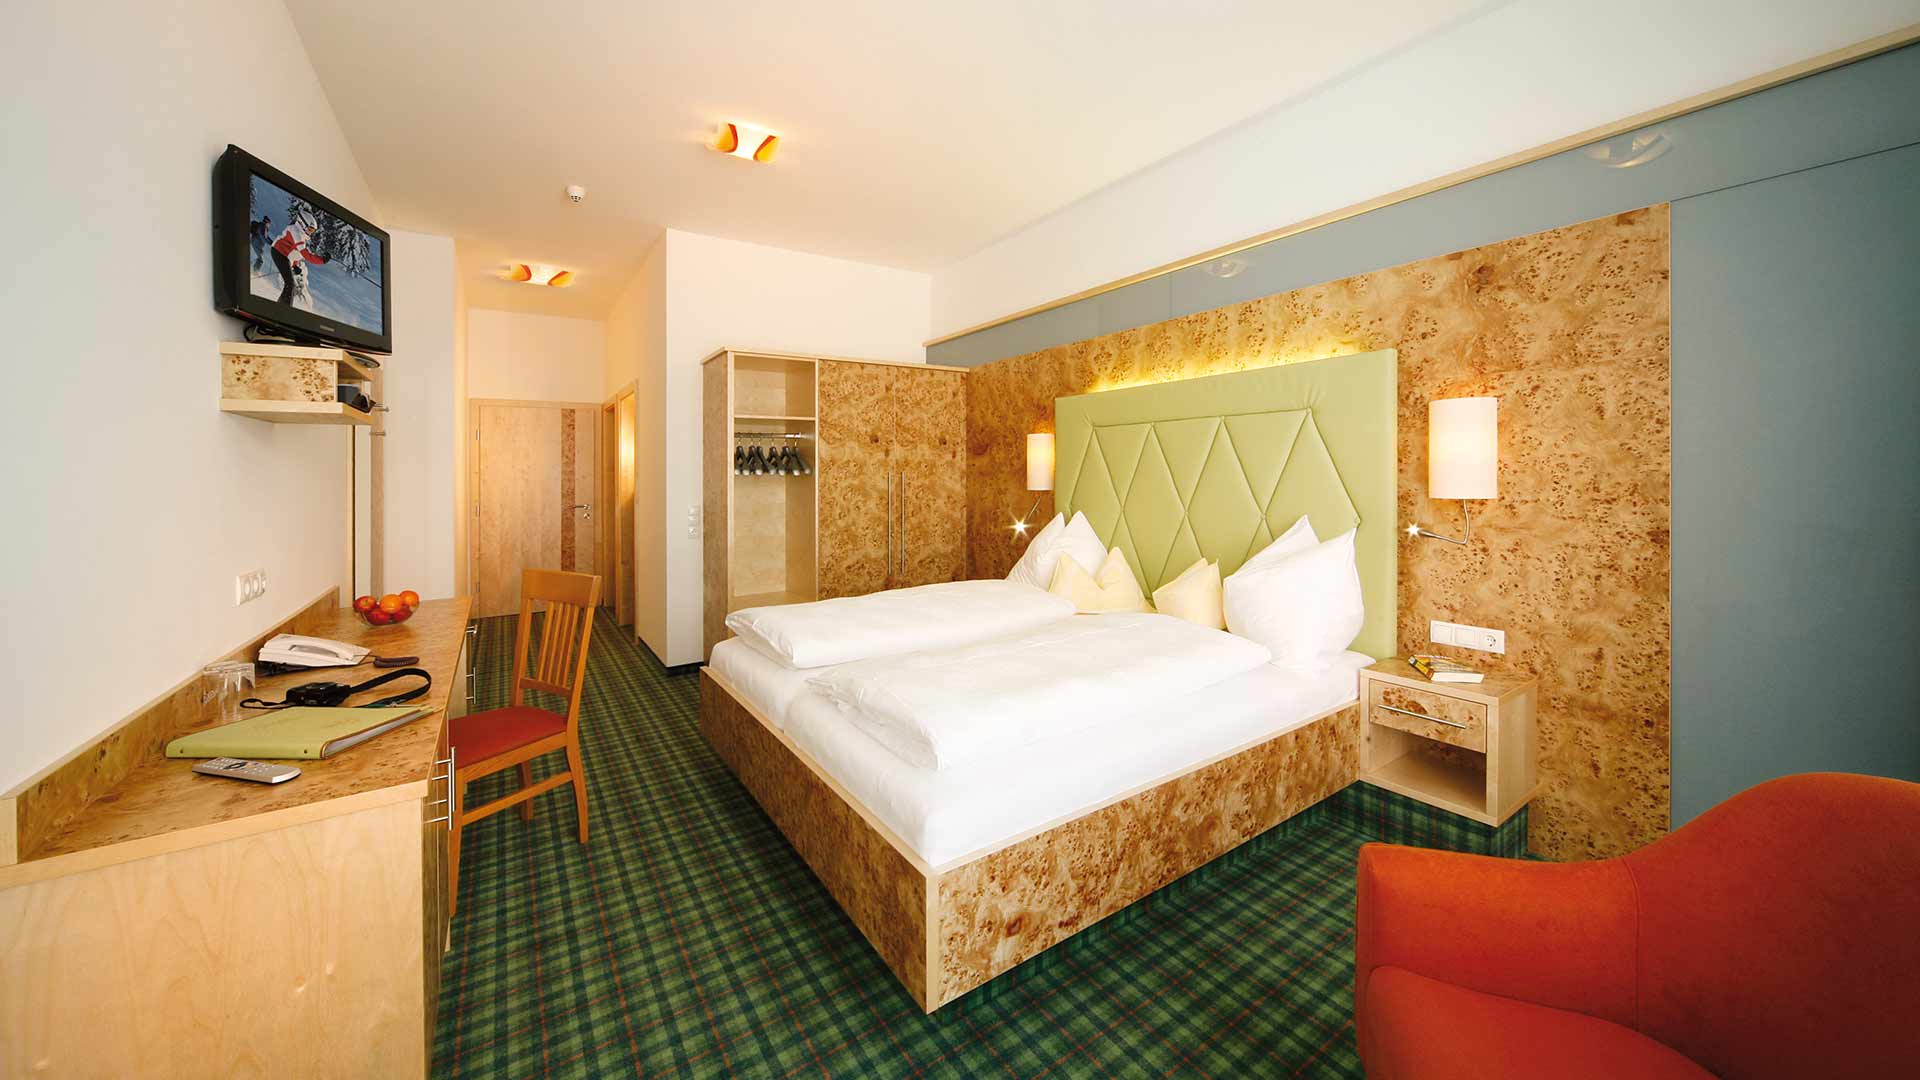 Comfortable rooms equipped with burr walnut, flat screen TV and bright bath rooms